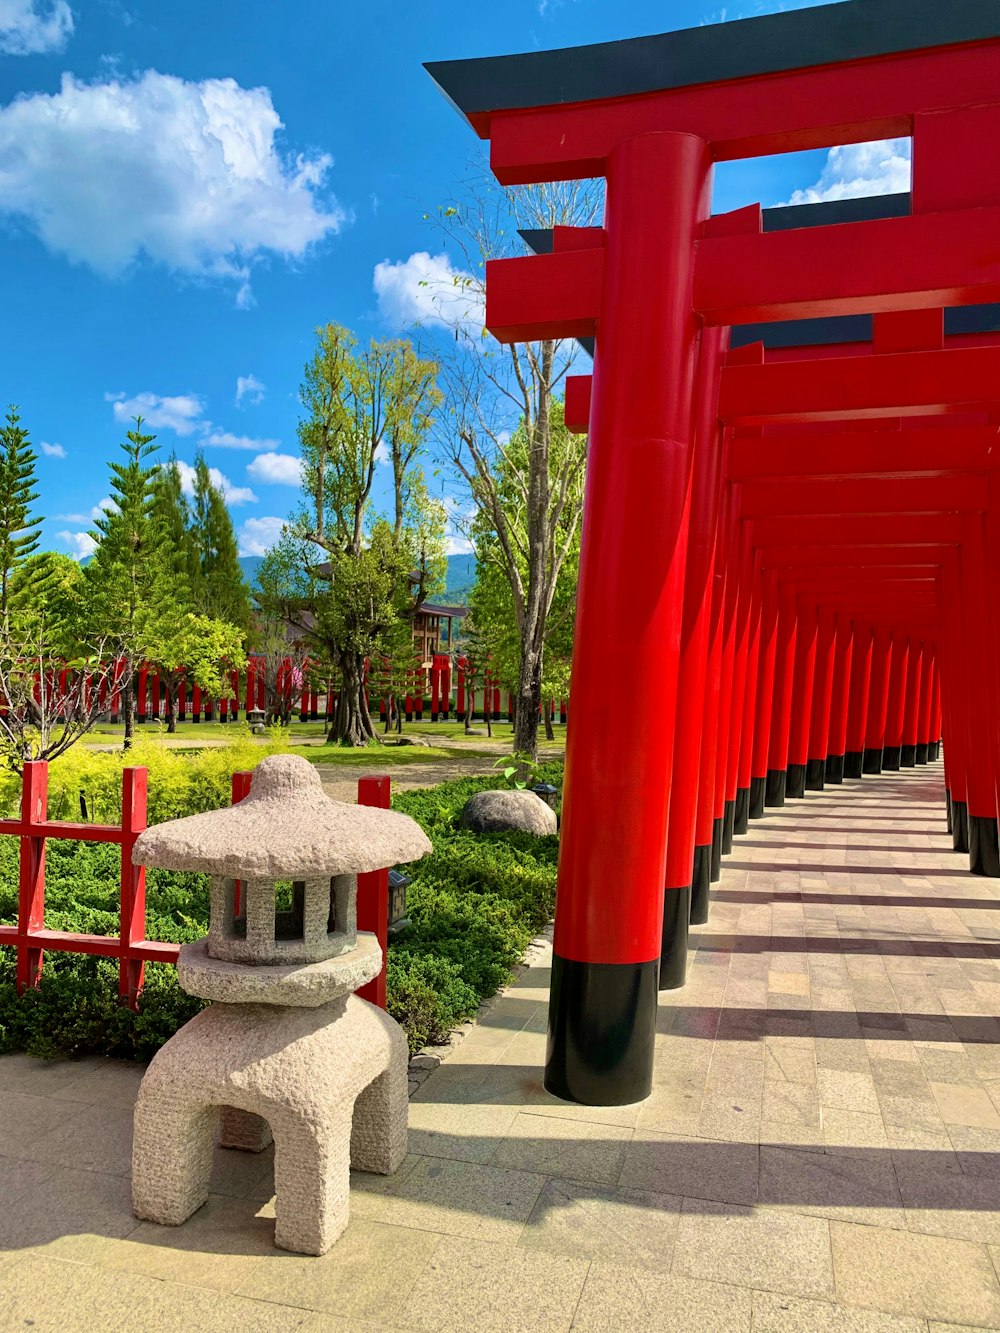 a row of red and black pillars in a park